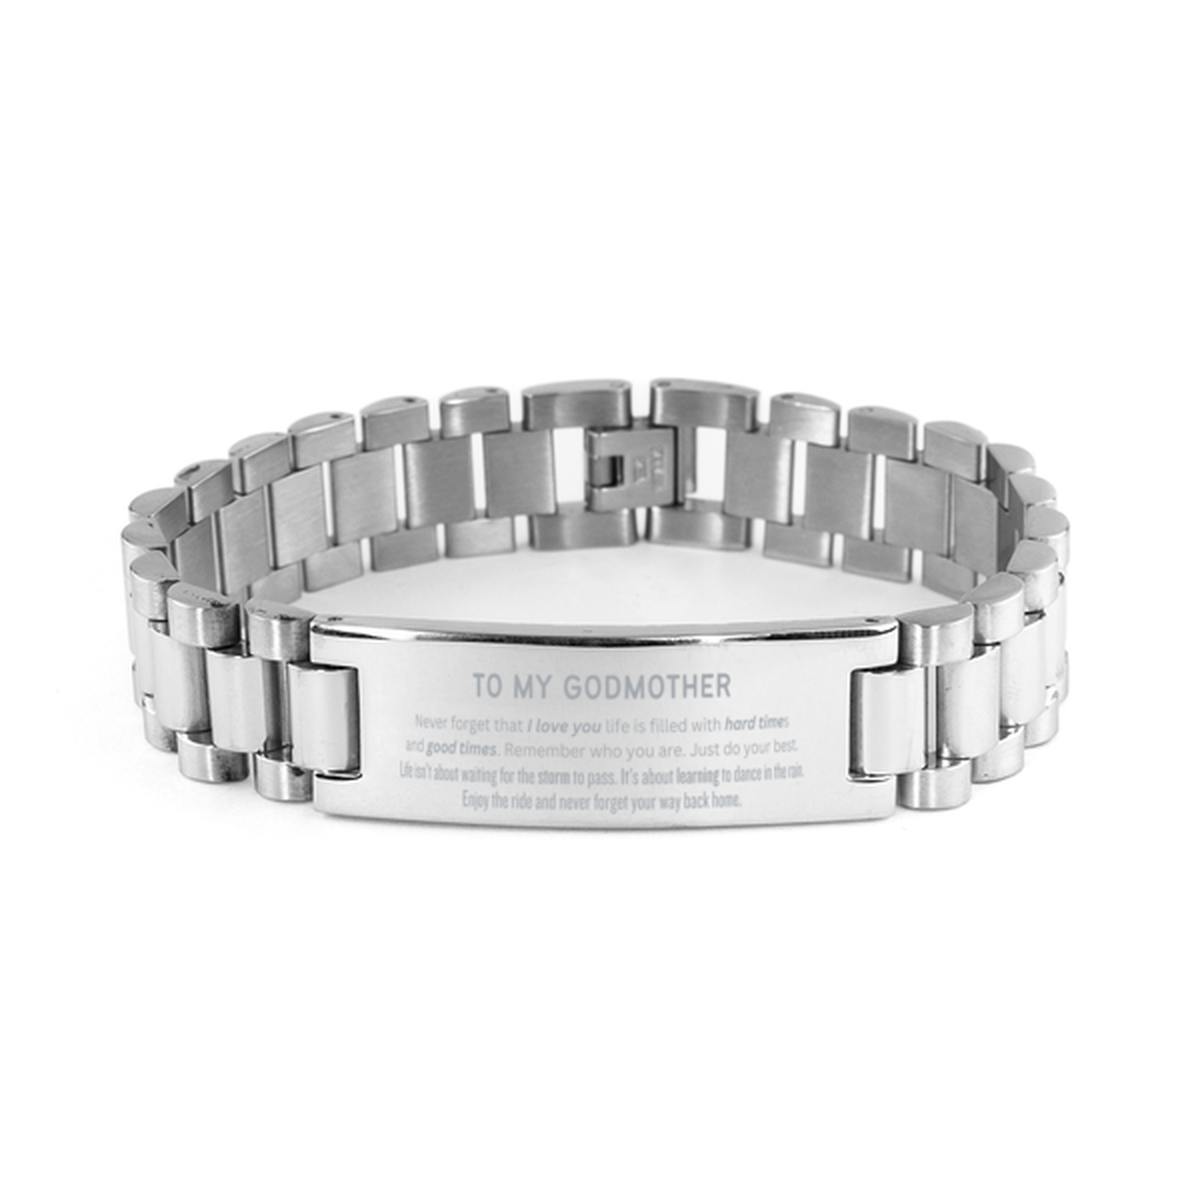 Christmas Godmother Ladder Stainless Steel Bracelet Gifts, To My Godmother Birthday Thank You Gifts For Godmother, Graduation Unique Gifts For Godmother To My Godmother Never forget that I love you life is filled with hard times and good times. Remember w